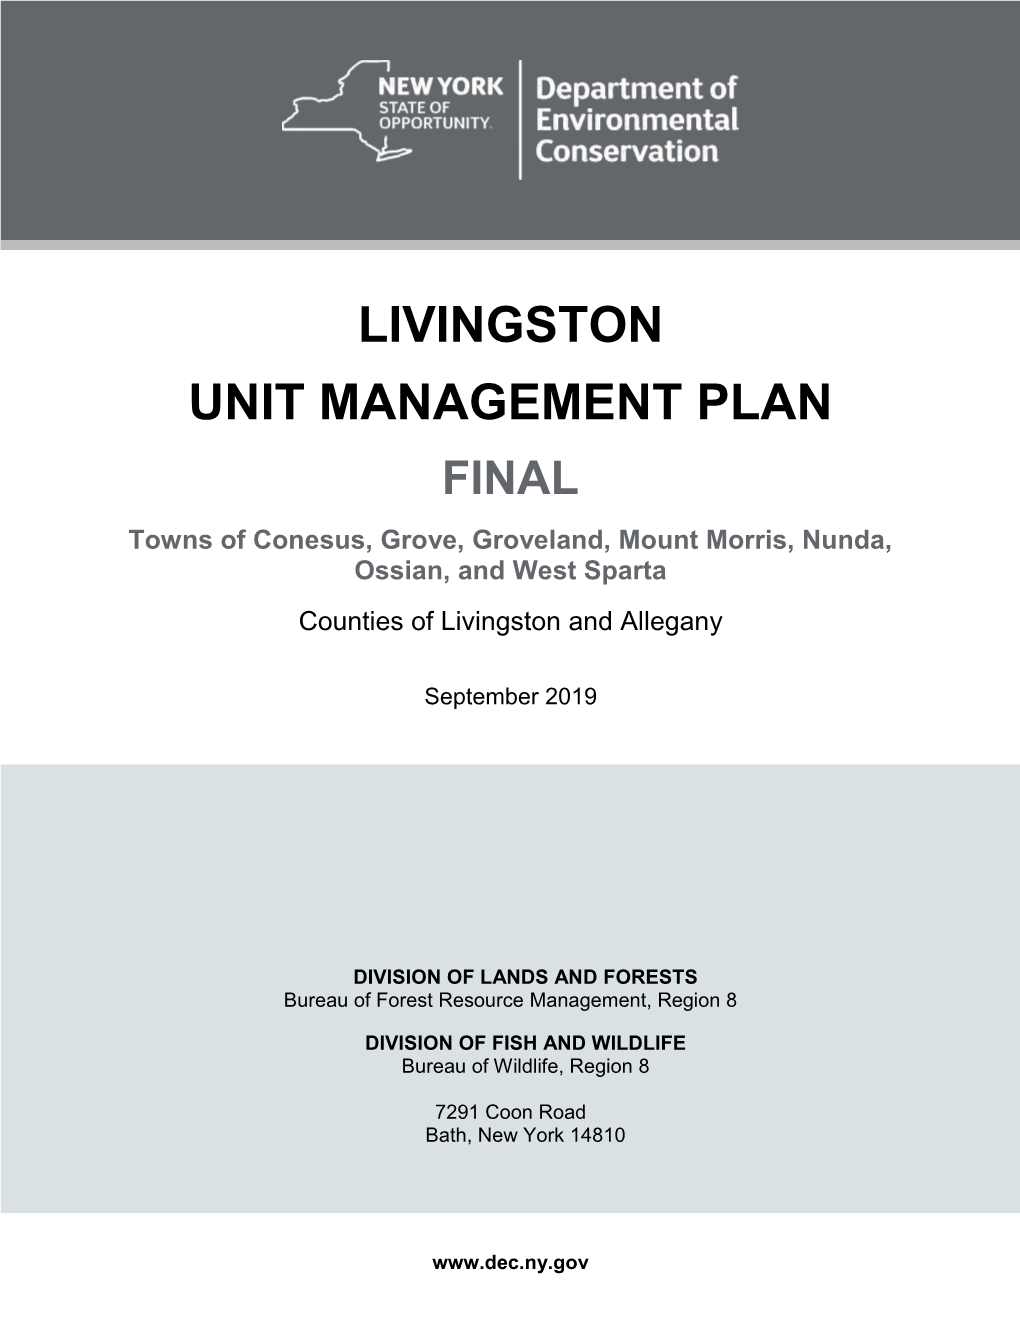 LIVINGSTON UNIT MANAGEMENT PLAN FINAL Towns of Conesus, Grove, Groveland, Mount Morris, Nunda, Ossian, and West Sparta Counties of Livingston and Allegany